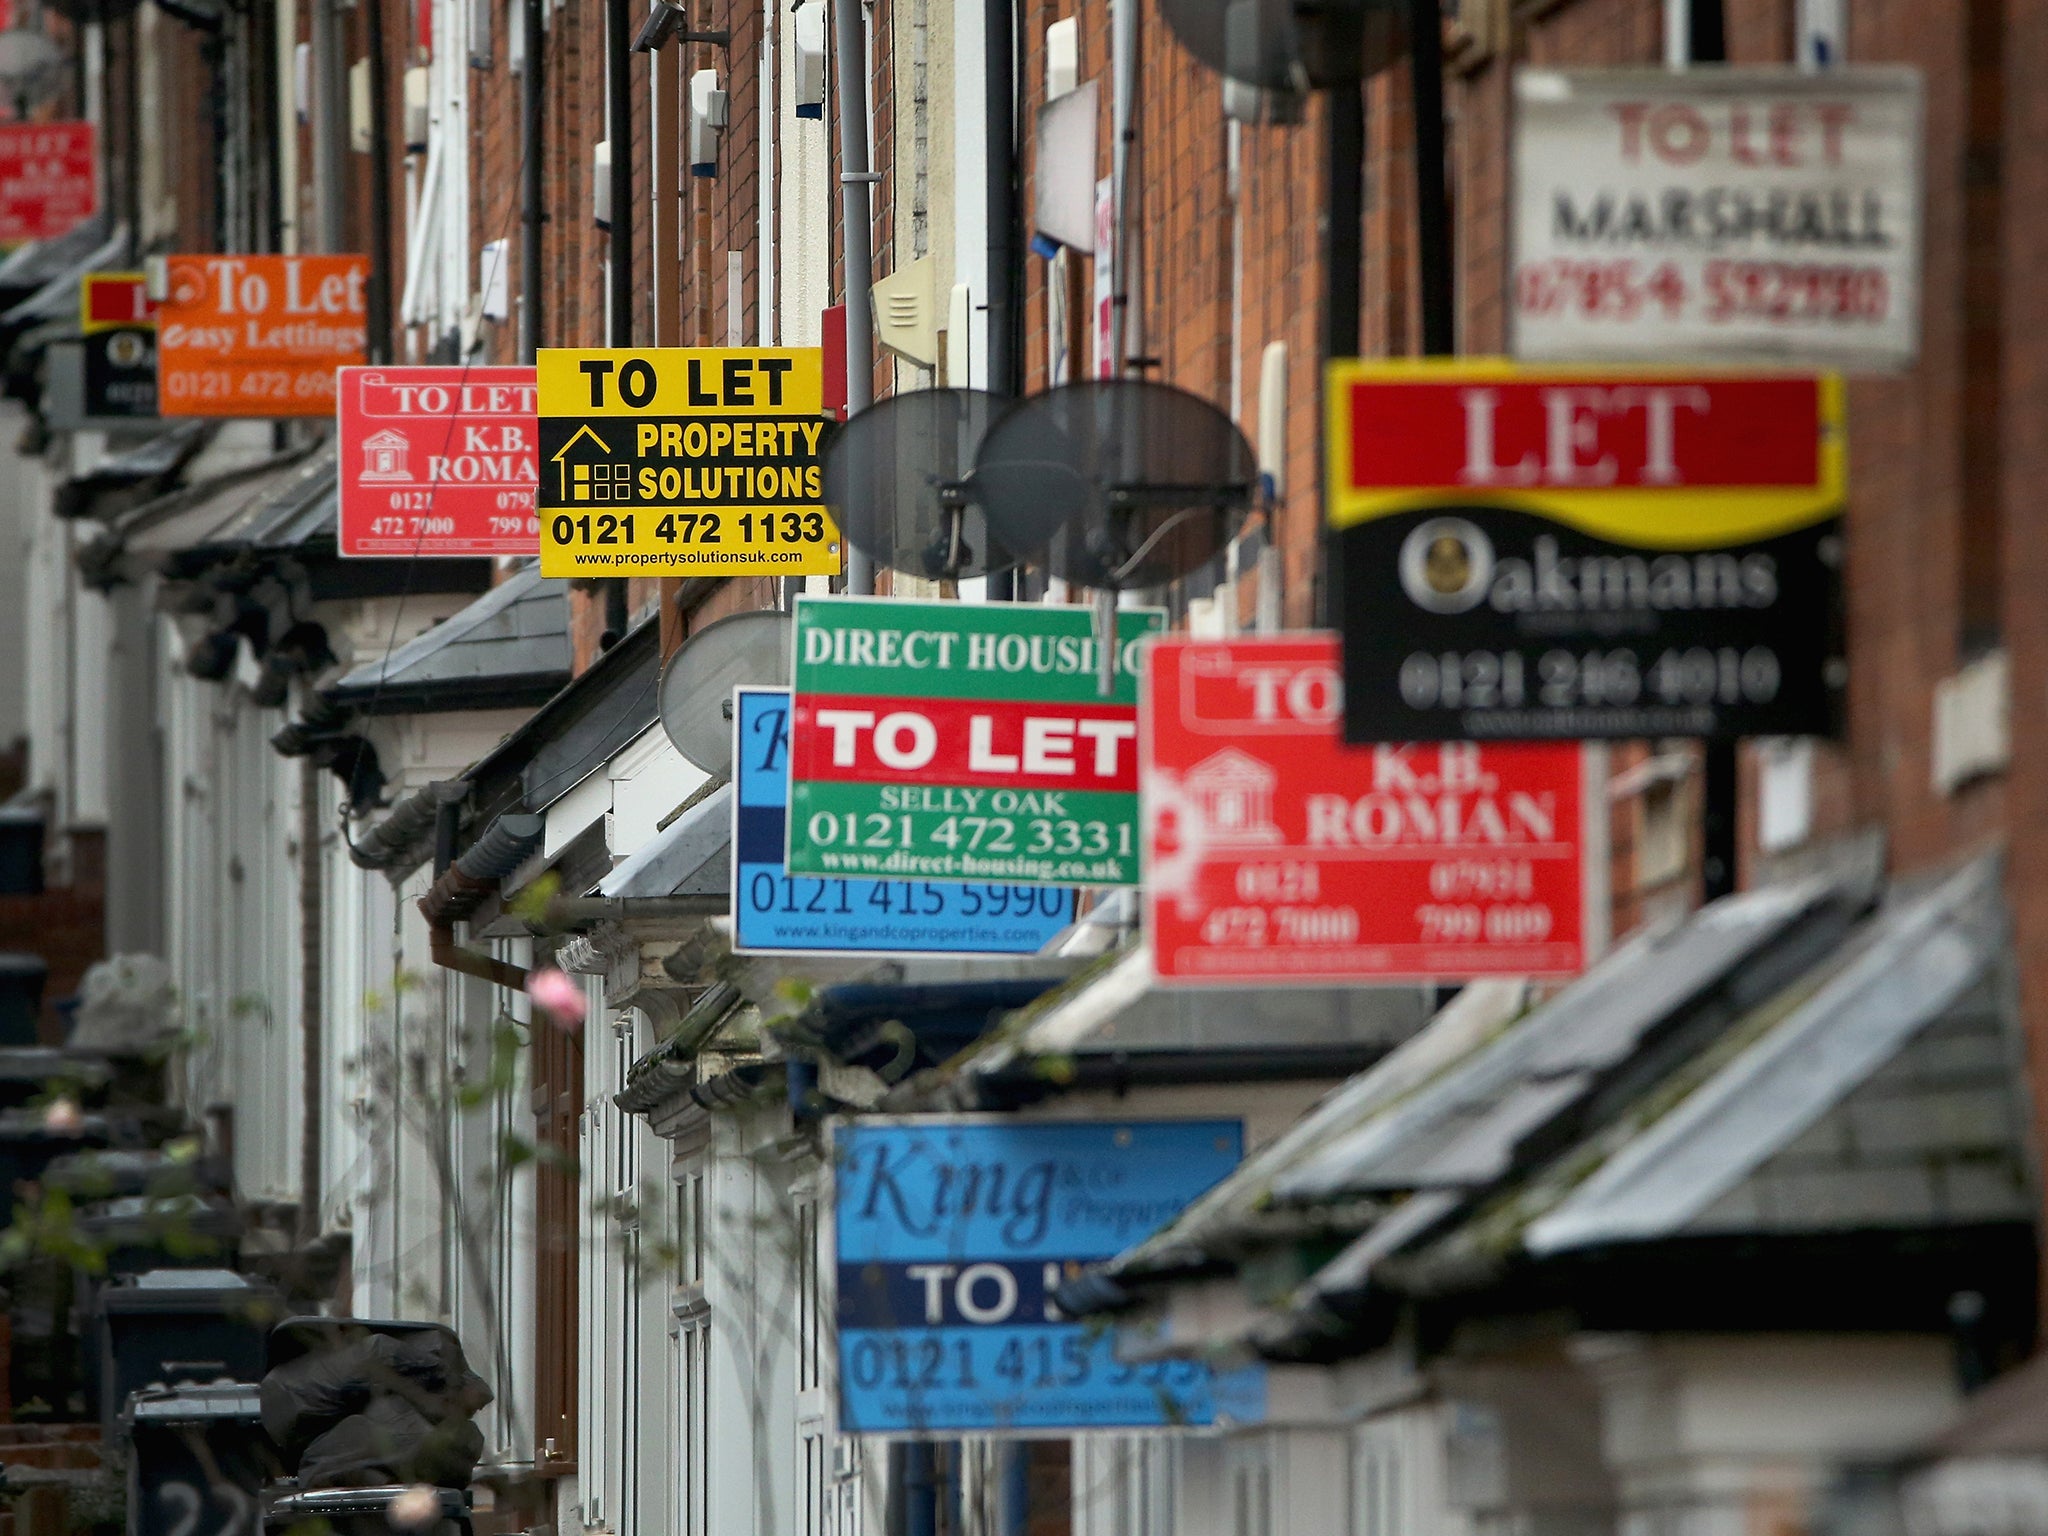 The South West of England saw the largest price increases, with average rent prices 13.6 per cent higher than a year ago.